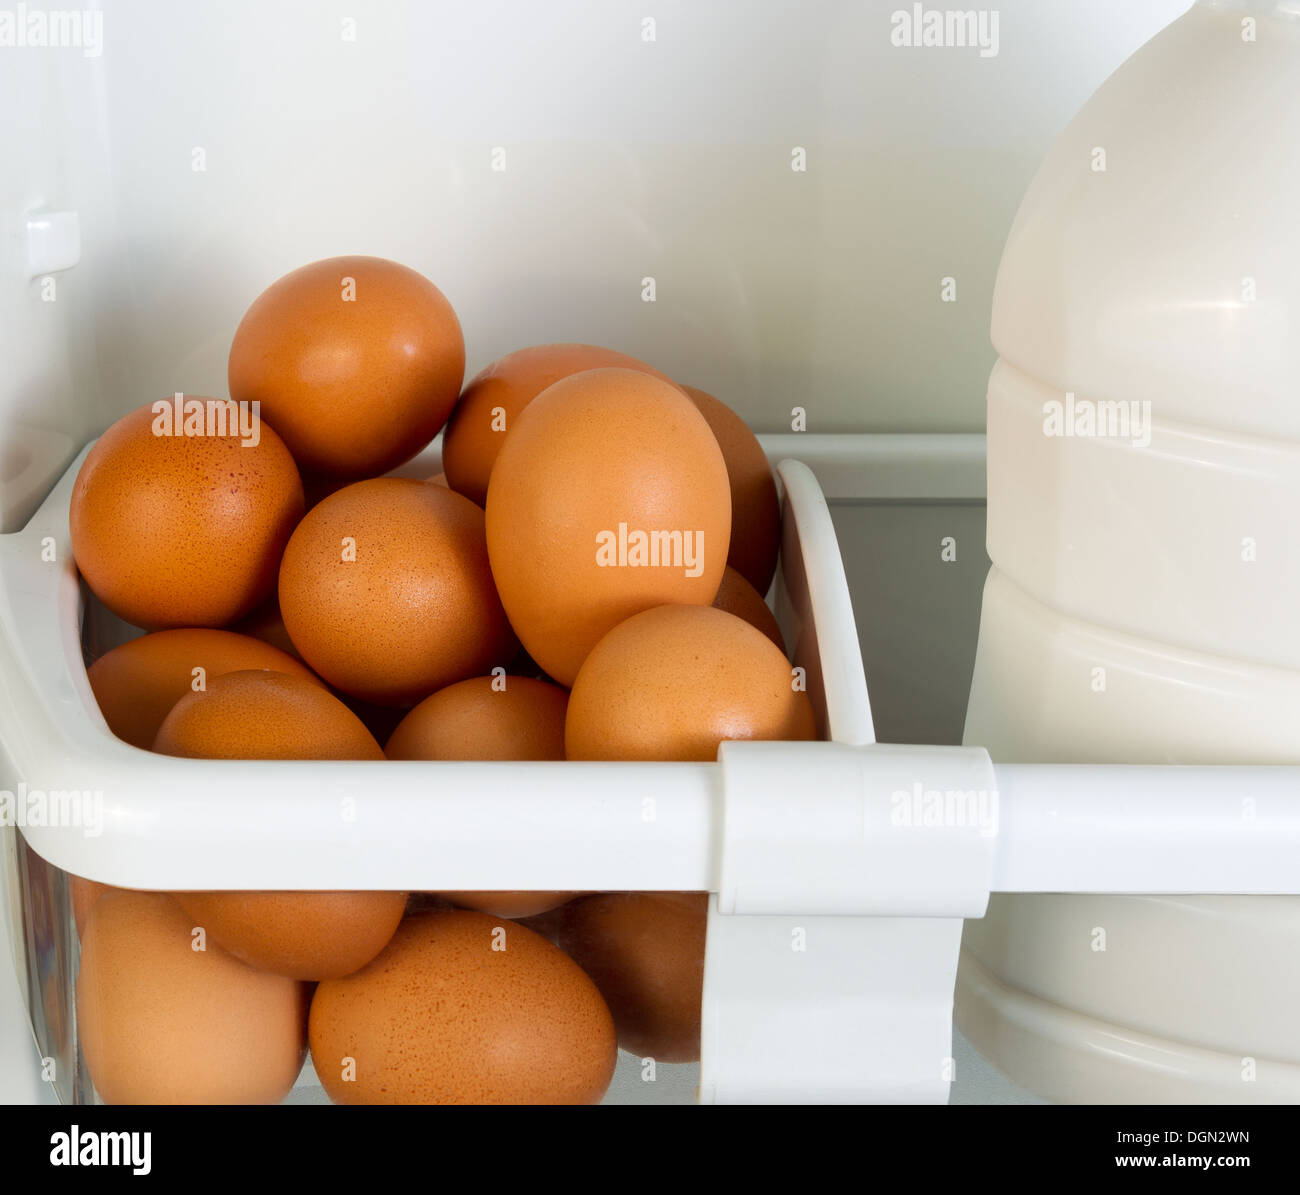 Closeup photo of Fresh brown organic eggs and partial milk container on inside of refrigerator door shelf Stock Photo